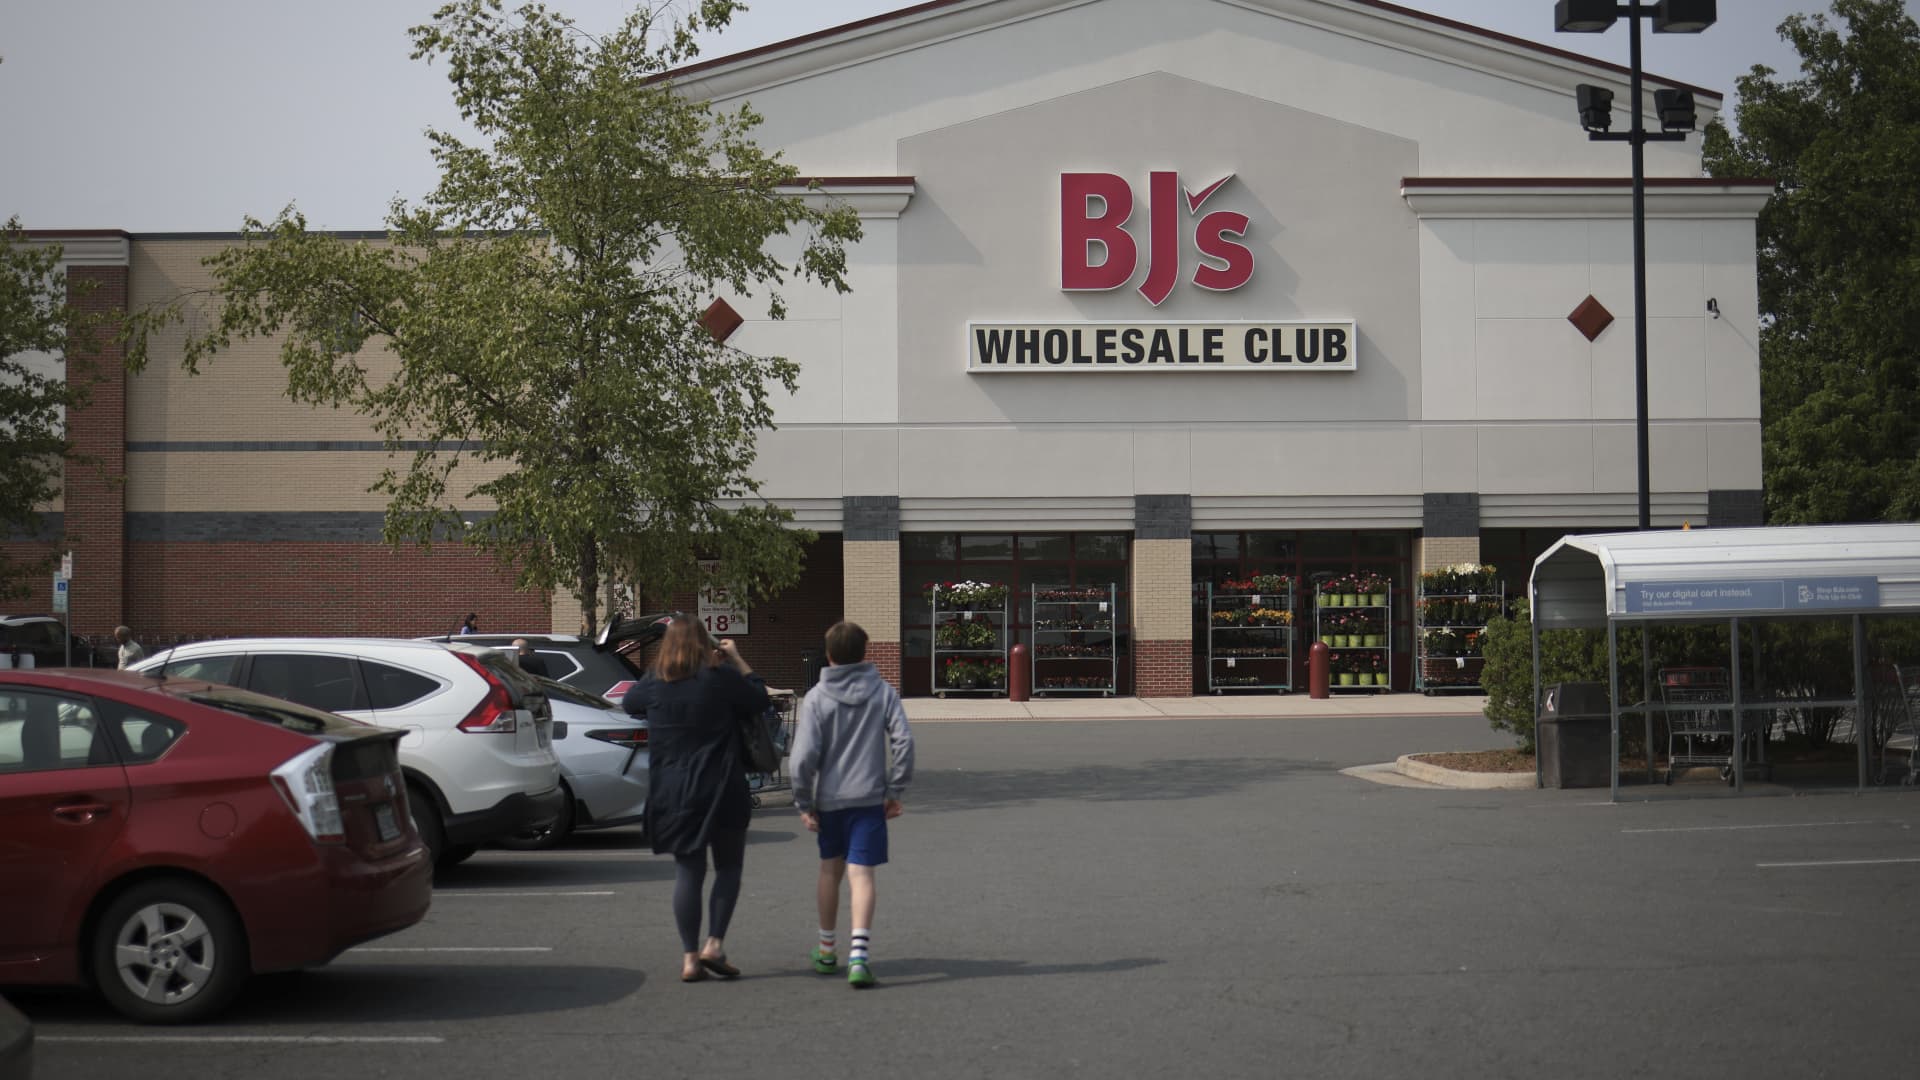 BJ’s Wholesale, Costco and Sam’s rival, will open clubs in Southeast